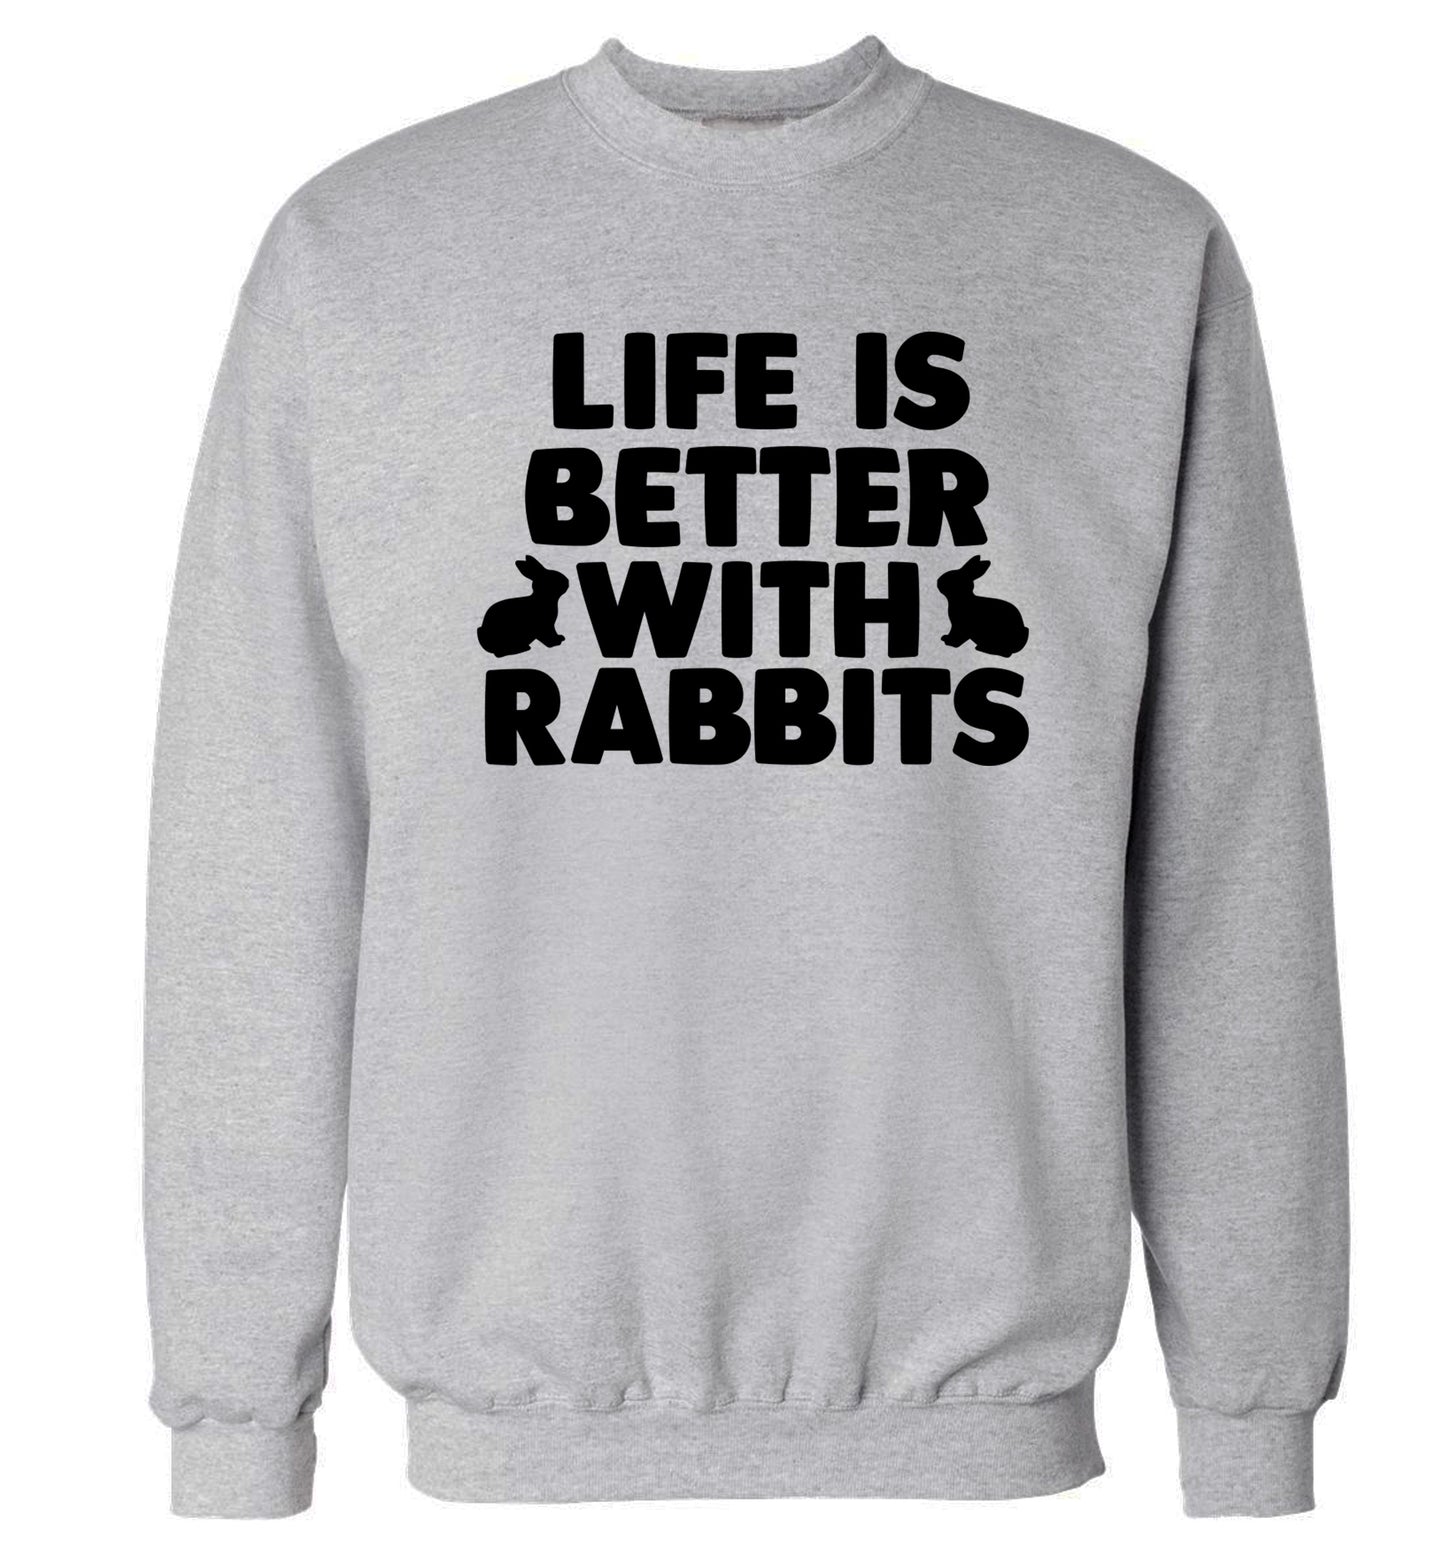 Life is better with rabbits Adult's unisex grey  sweater 2XL